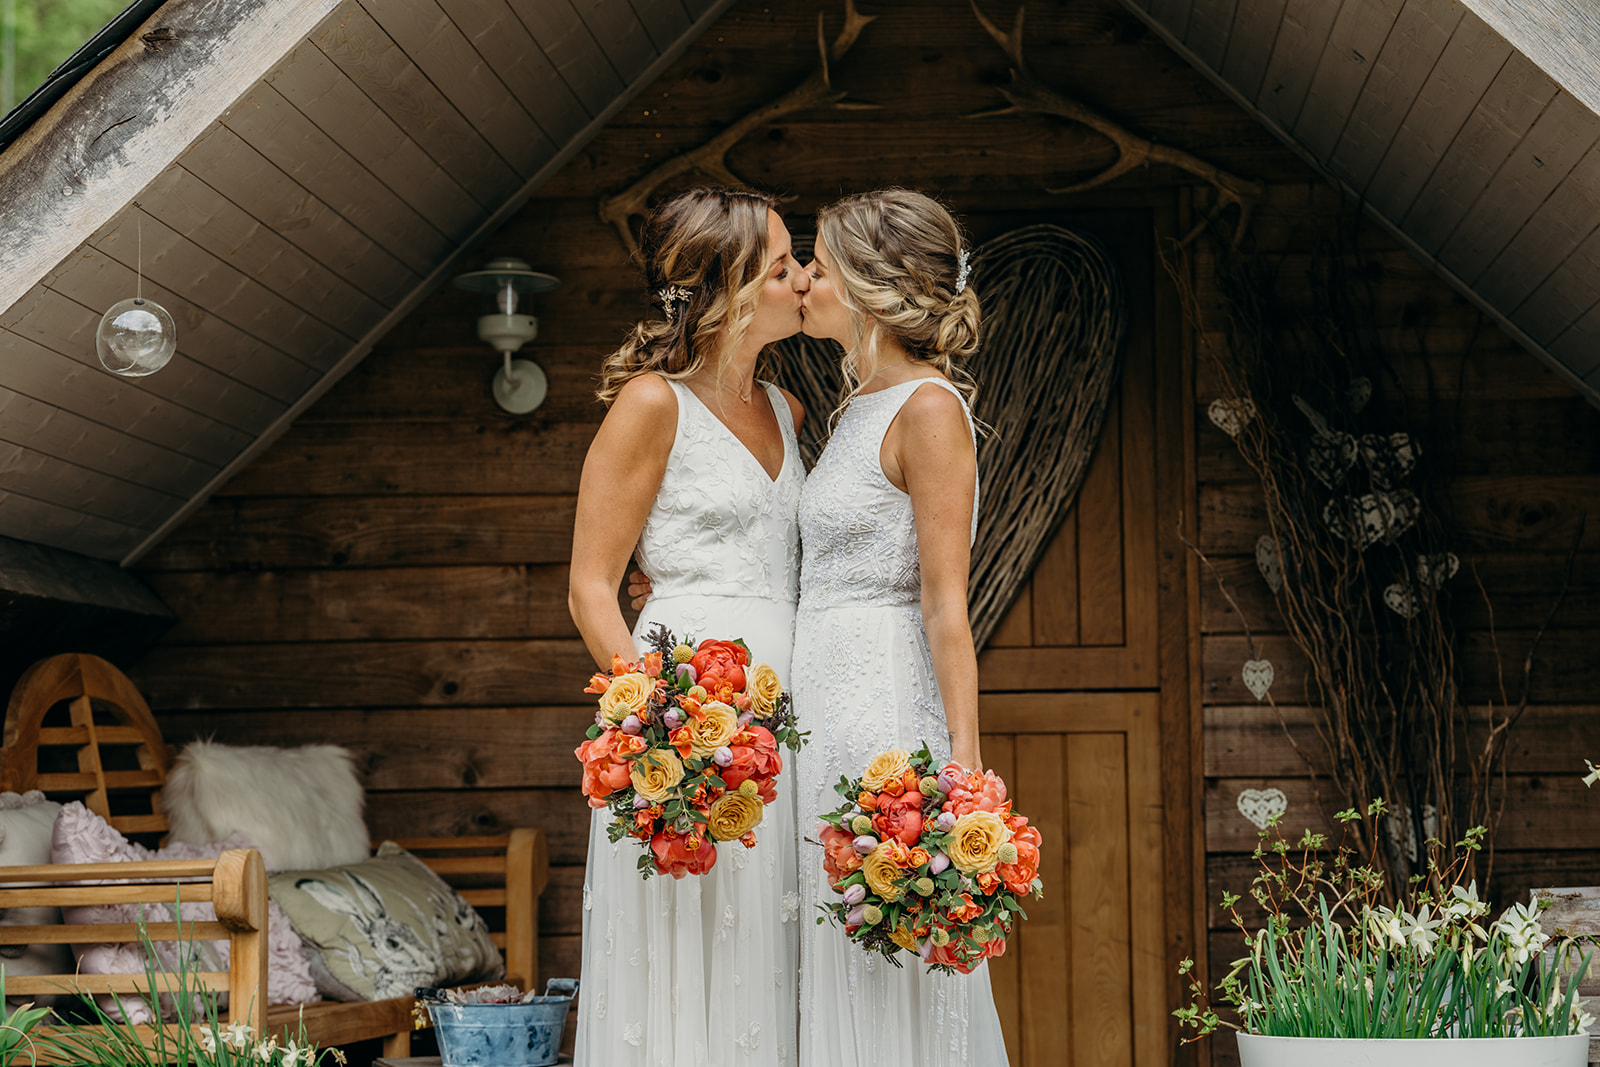 same sex elopement wedding with two blond white brides in mismatching white wedding dresses kissing in a rustic apex holding matching brightly coloured bridal bouquets in coral and yellow